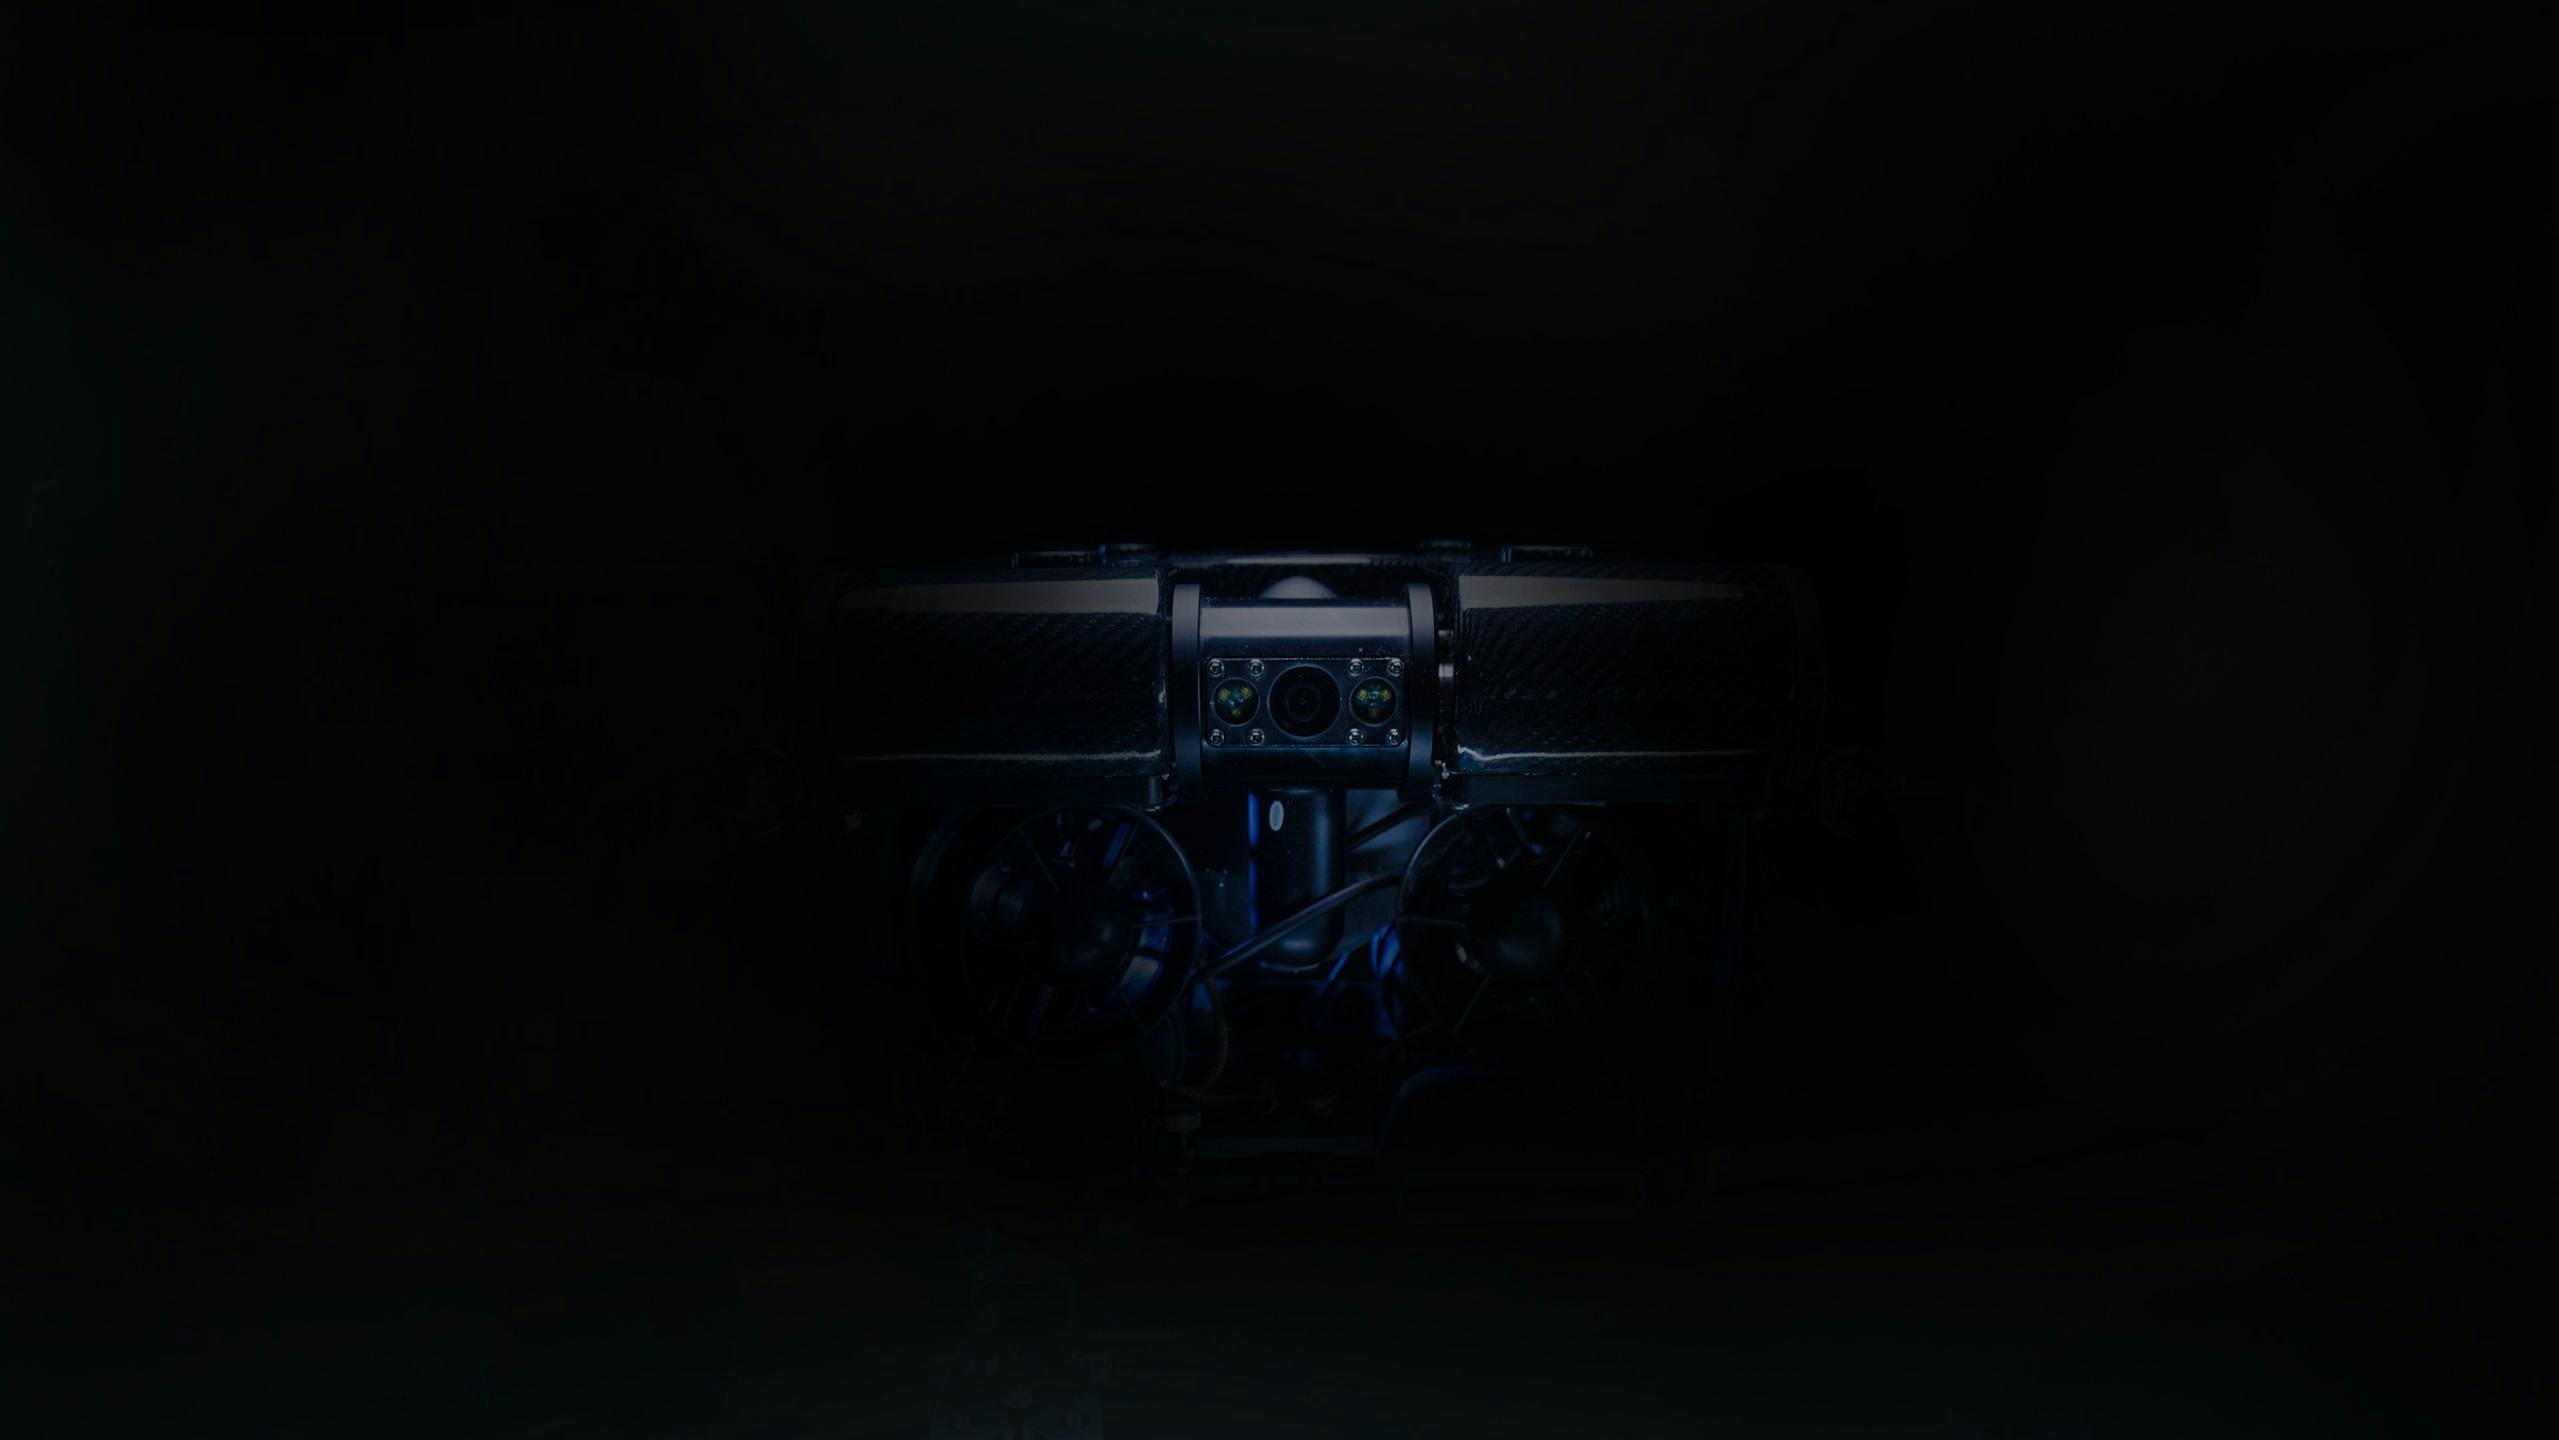 "A new piloting experience awaits" Pivot ROV with black background